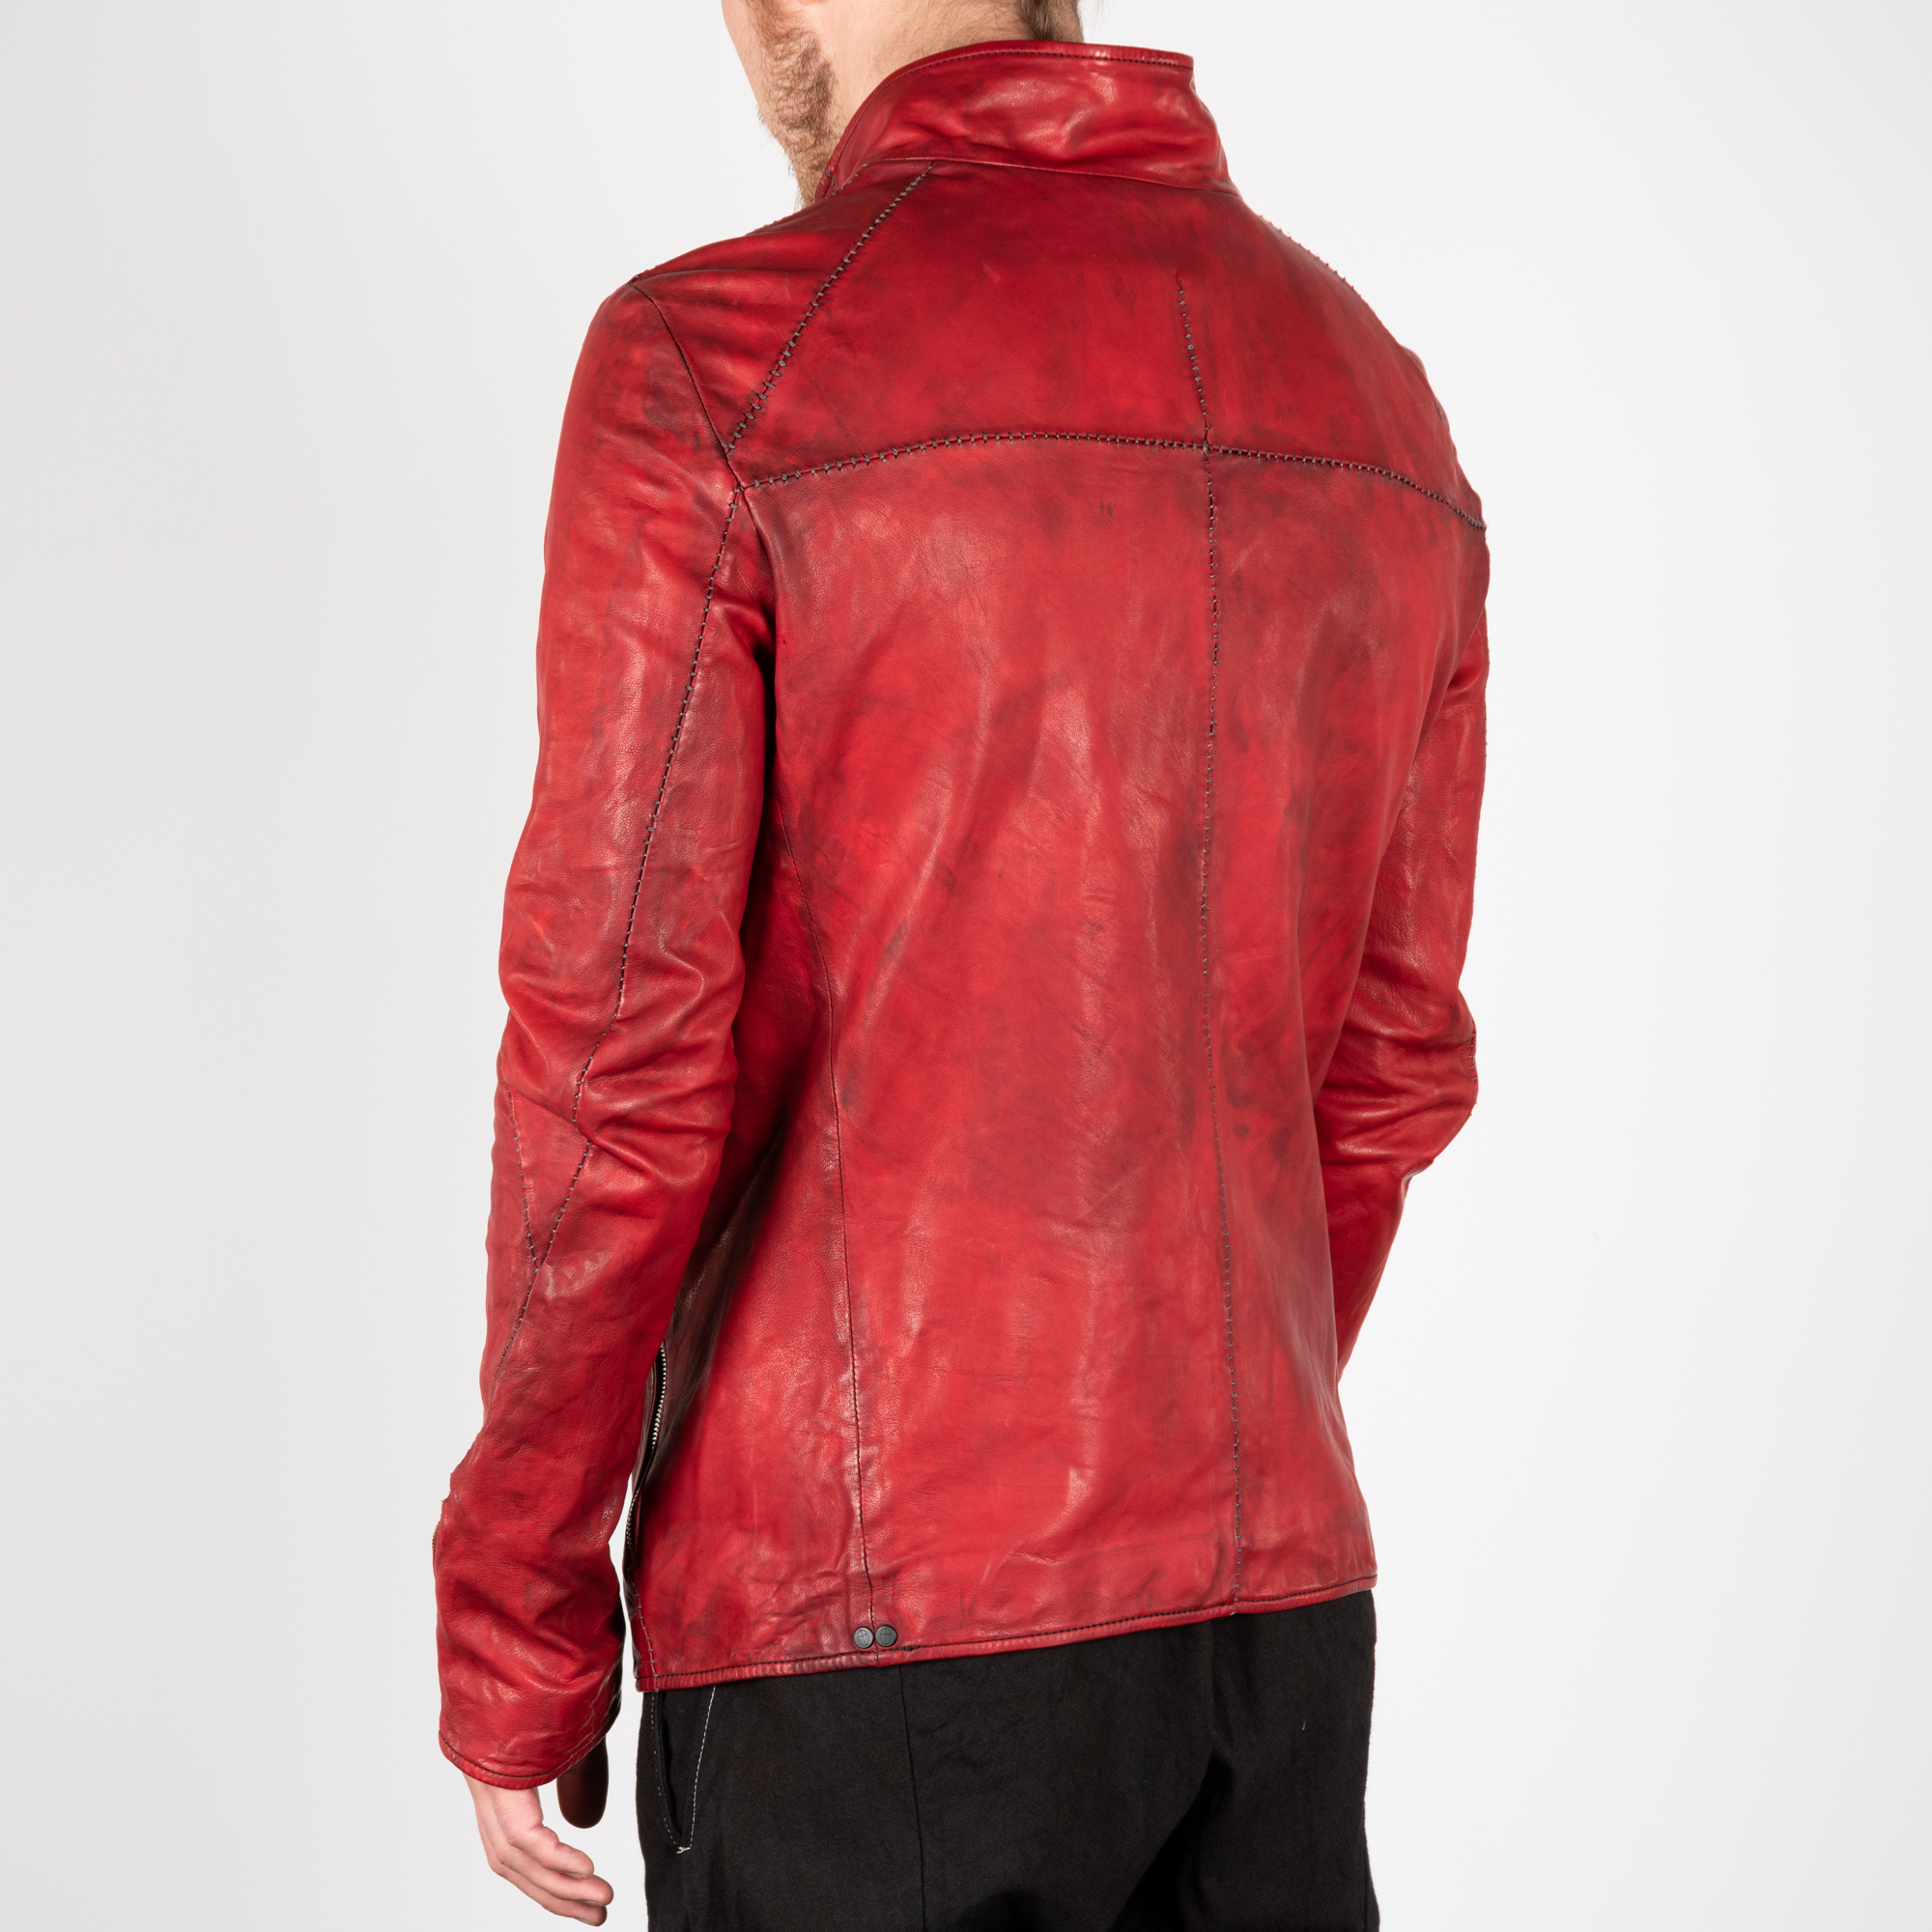 DIRTY RED SHEEP LEATHER JACKET|wolfensson